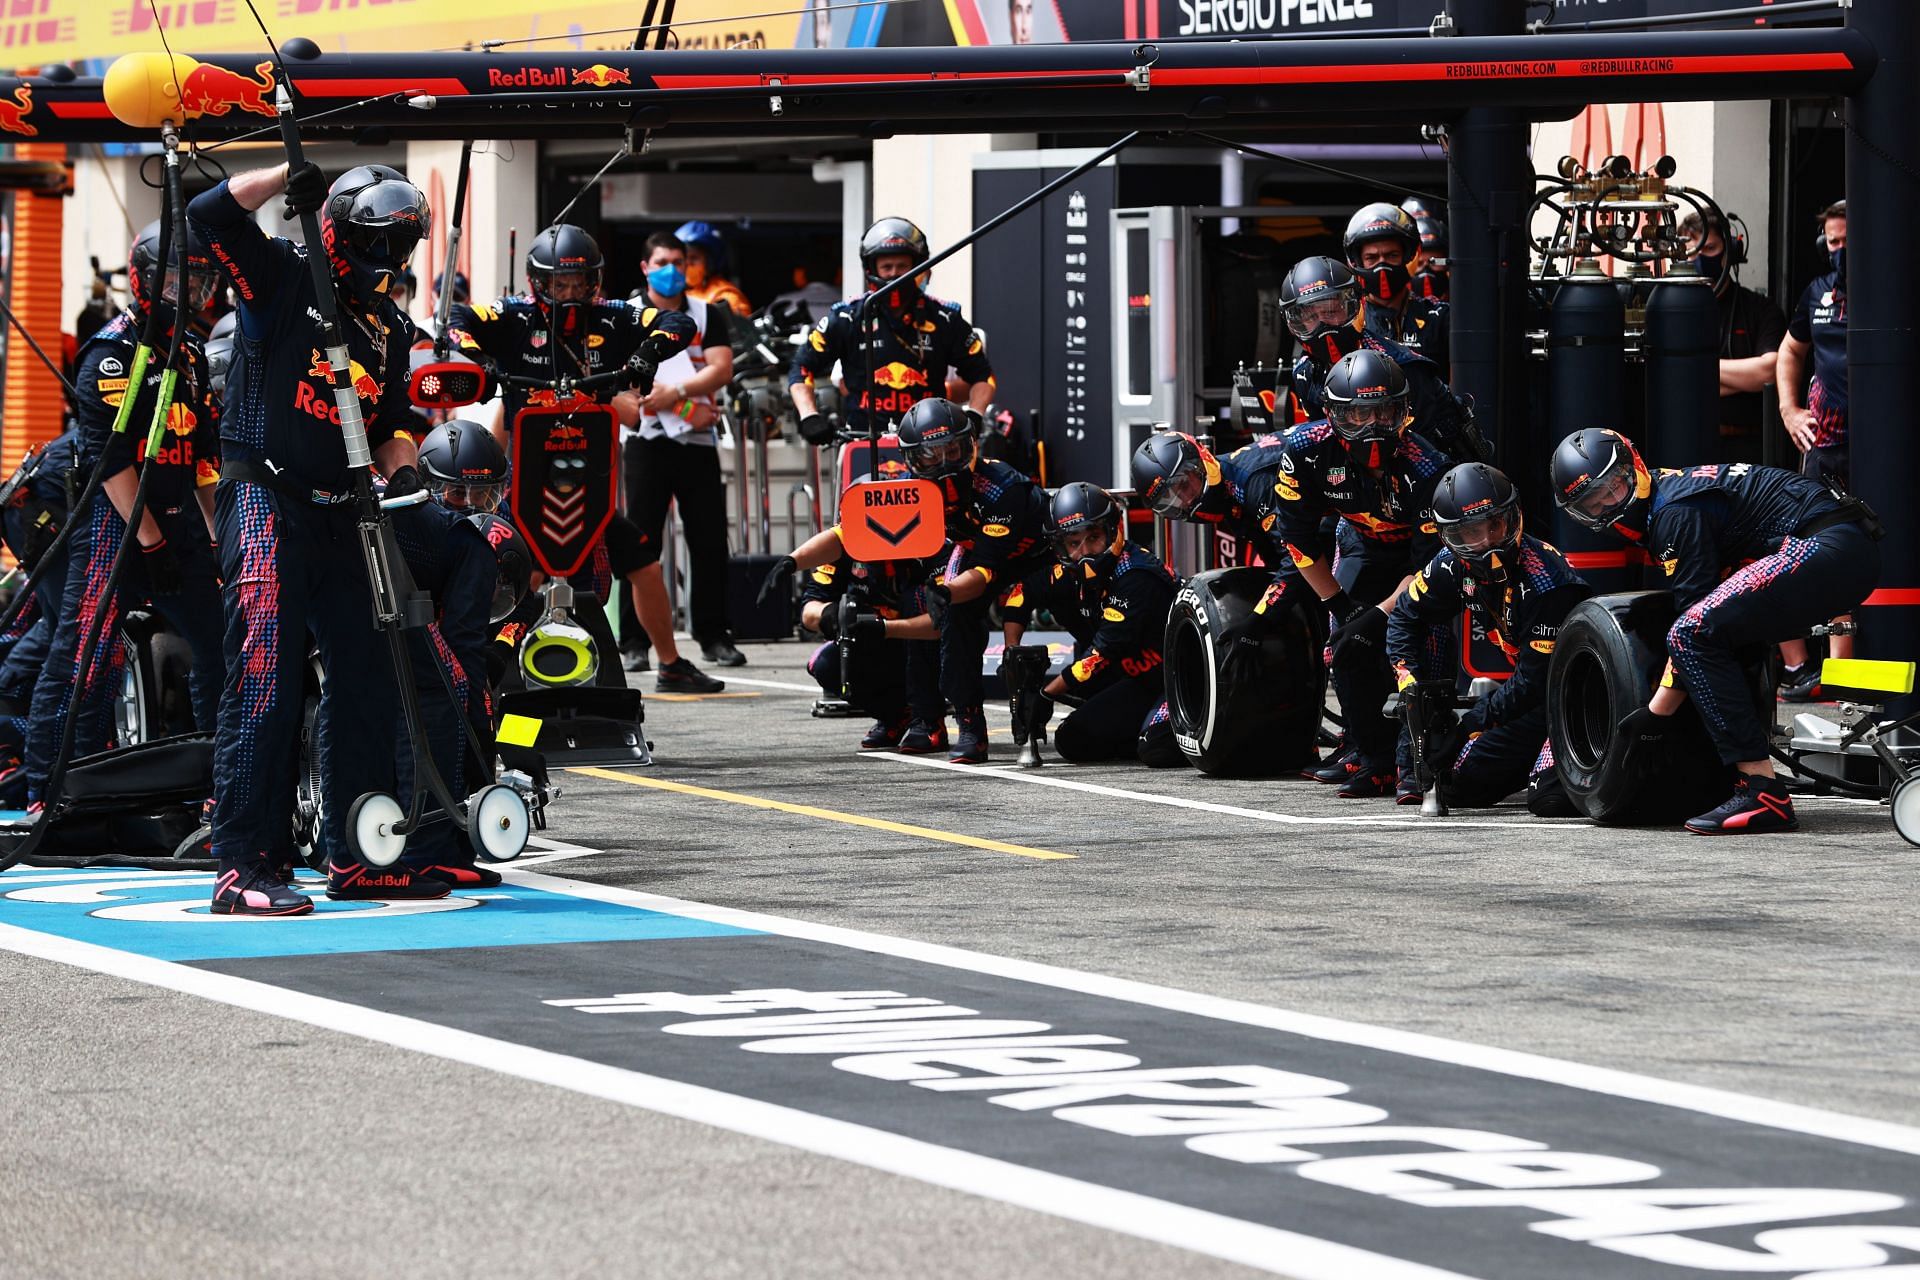 The Red Bull Racing pit crew prepare for a pitstop during the F1 Grand Prix of France at Circuit Paul Ricard (Photo by Mark Thompson/Getty Images)